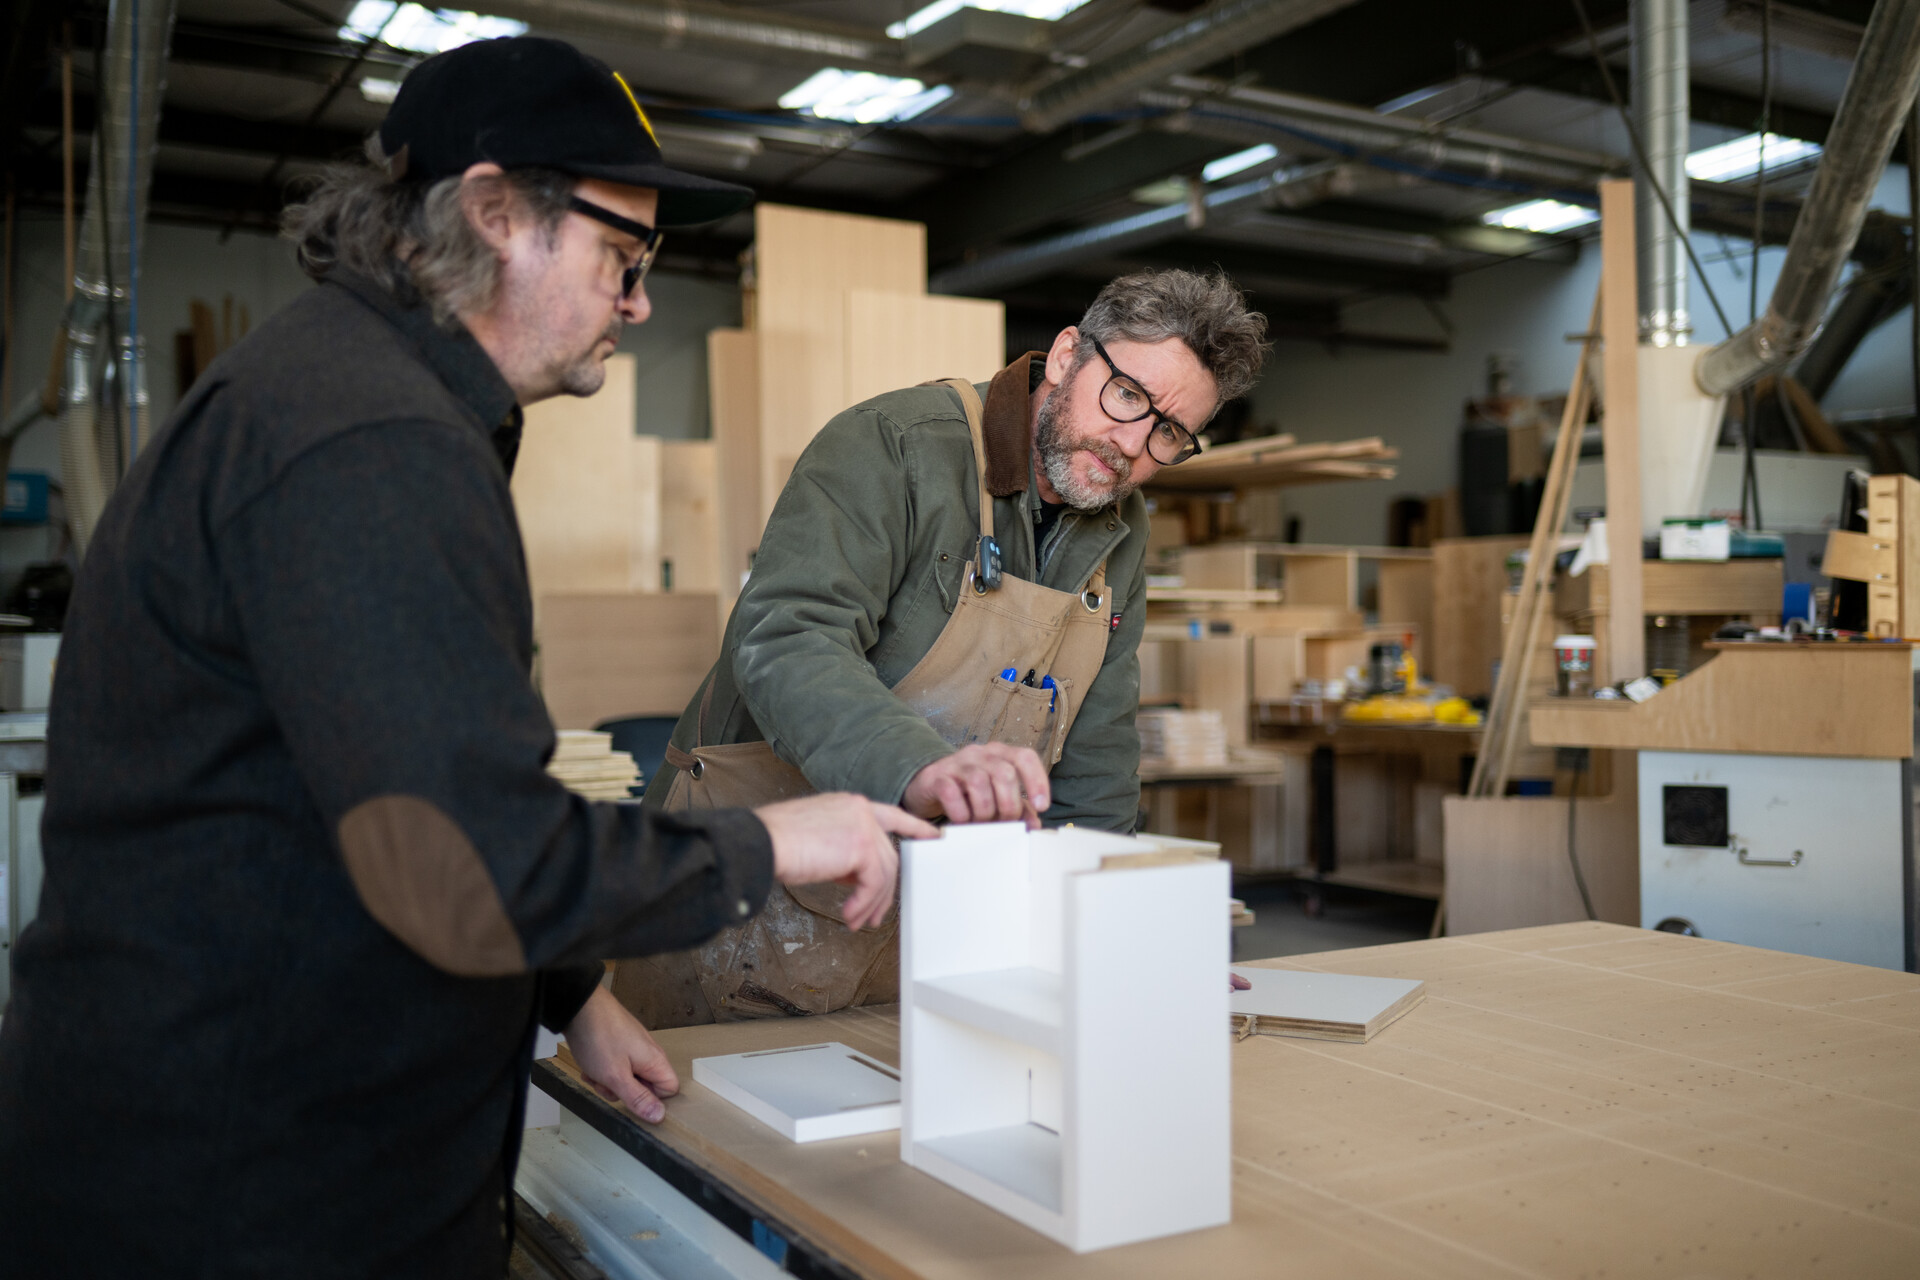 Two white men with glasses talk over a white box in process of completion in a furniture store with carpentry equipment around them.